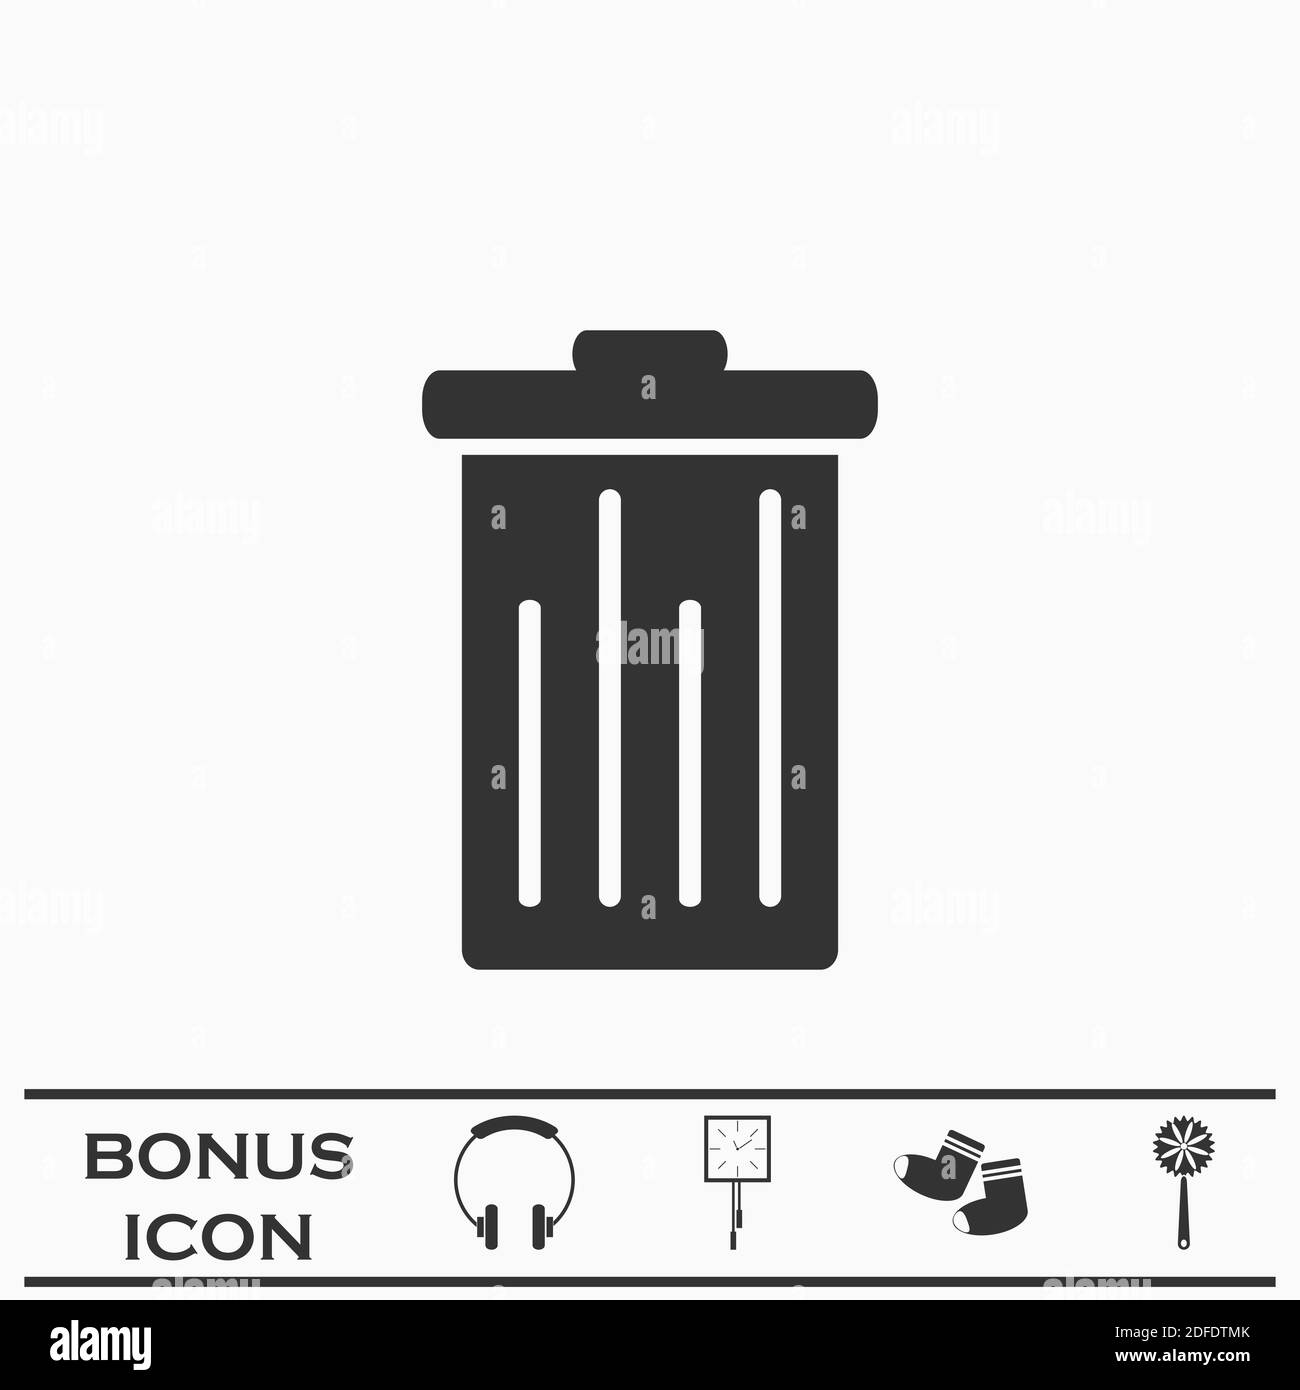 Trash can icon flat. Black pictogram on white background. Vector illustration symbol and bonus button Stock Vector